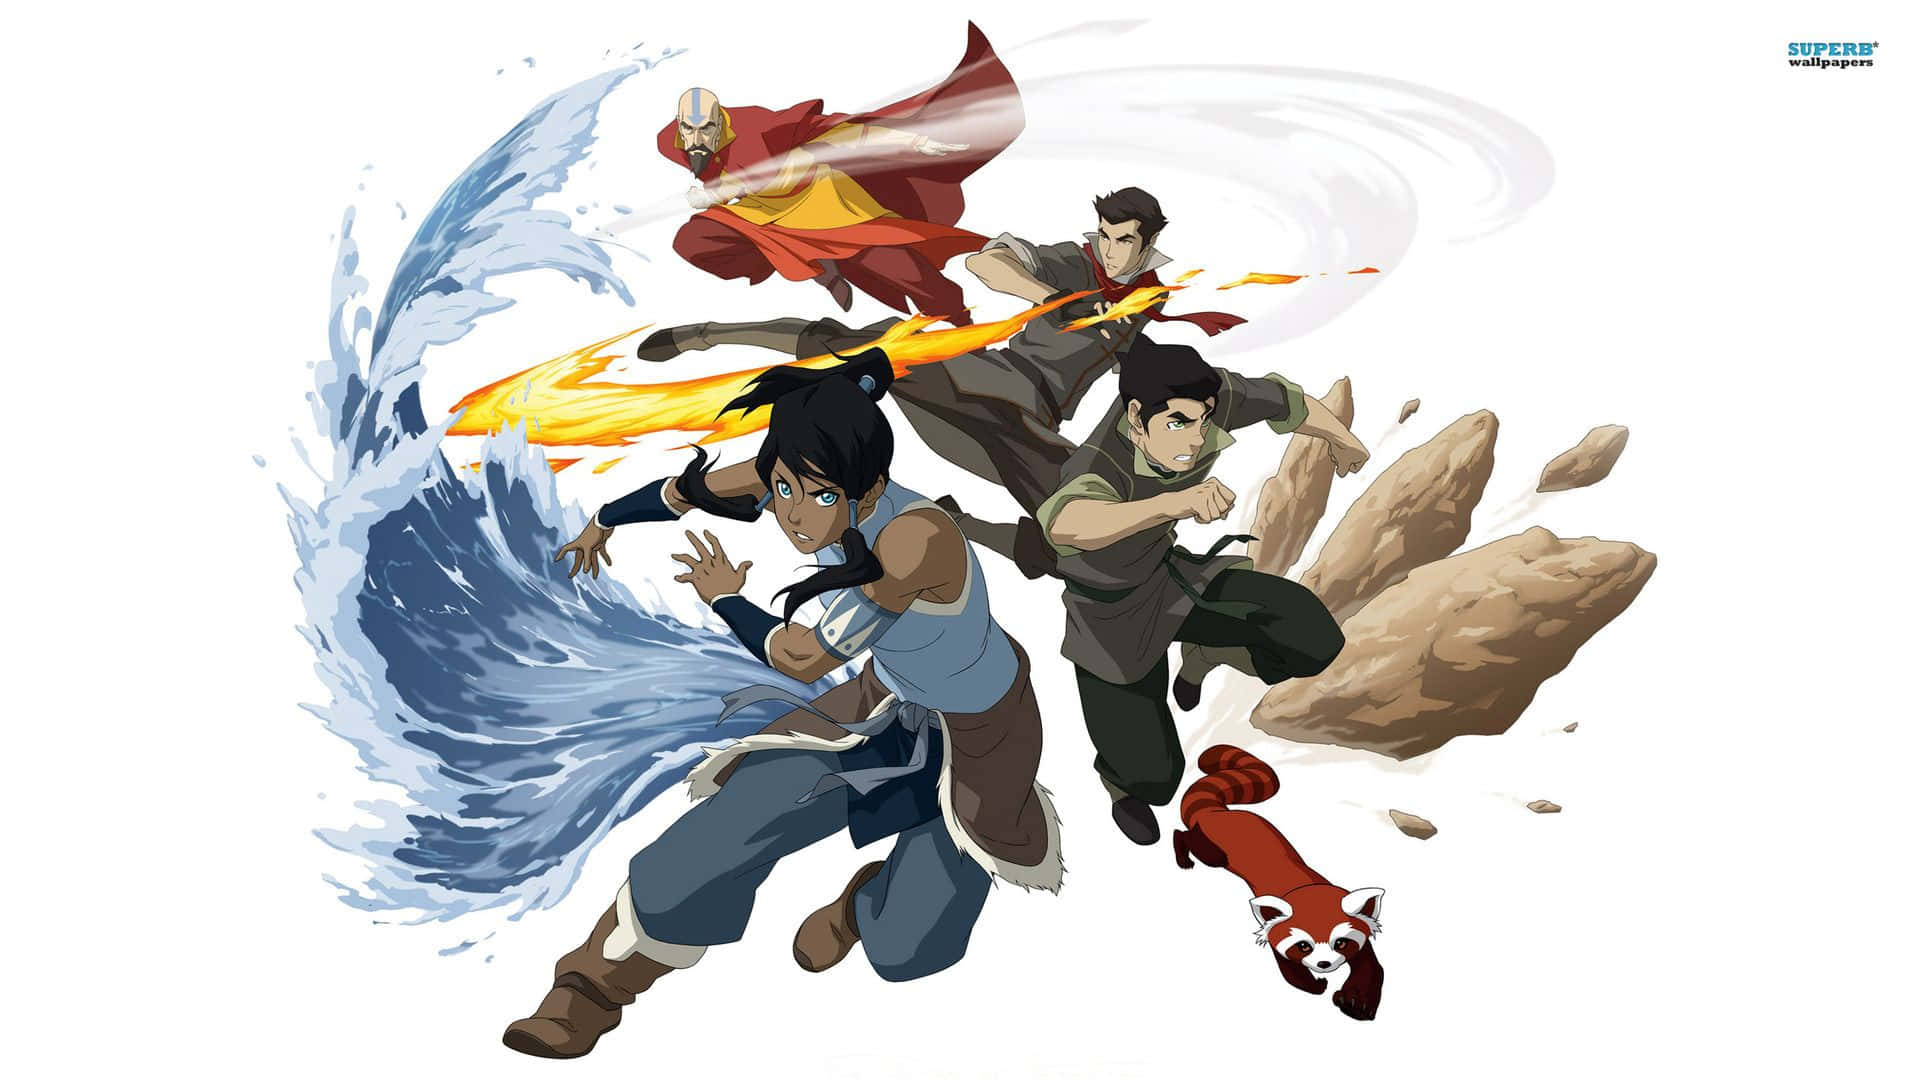 Korra Stands Tall As The Avatar, Ready To Defend The World Of Balance. Background